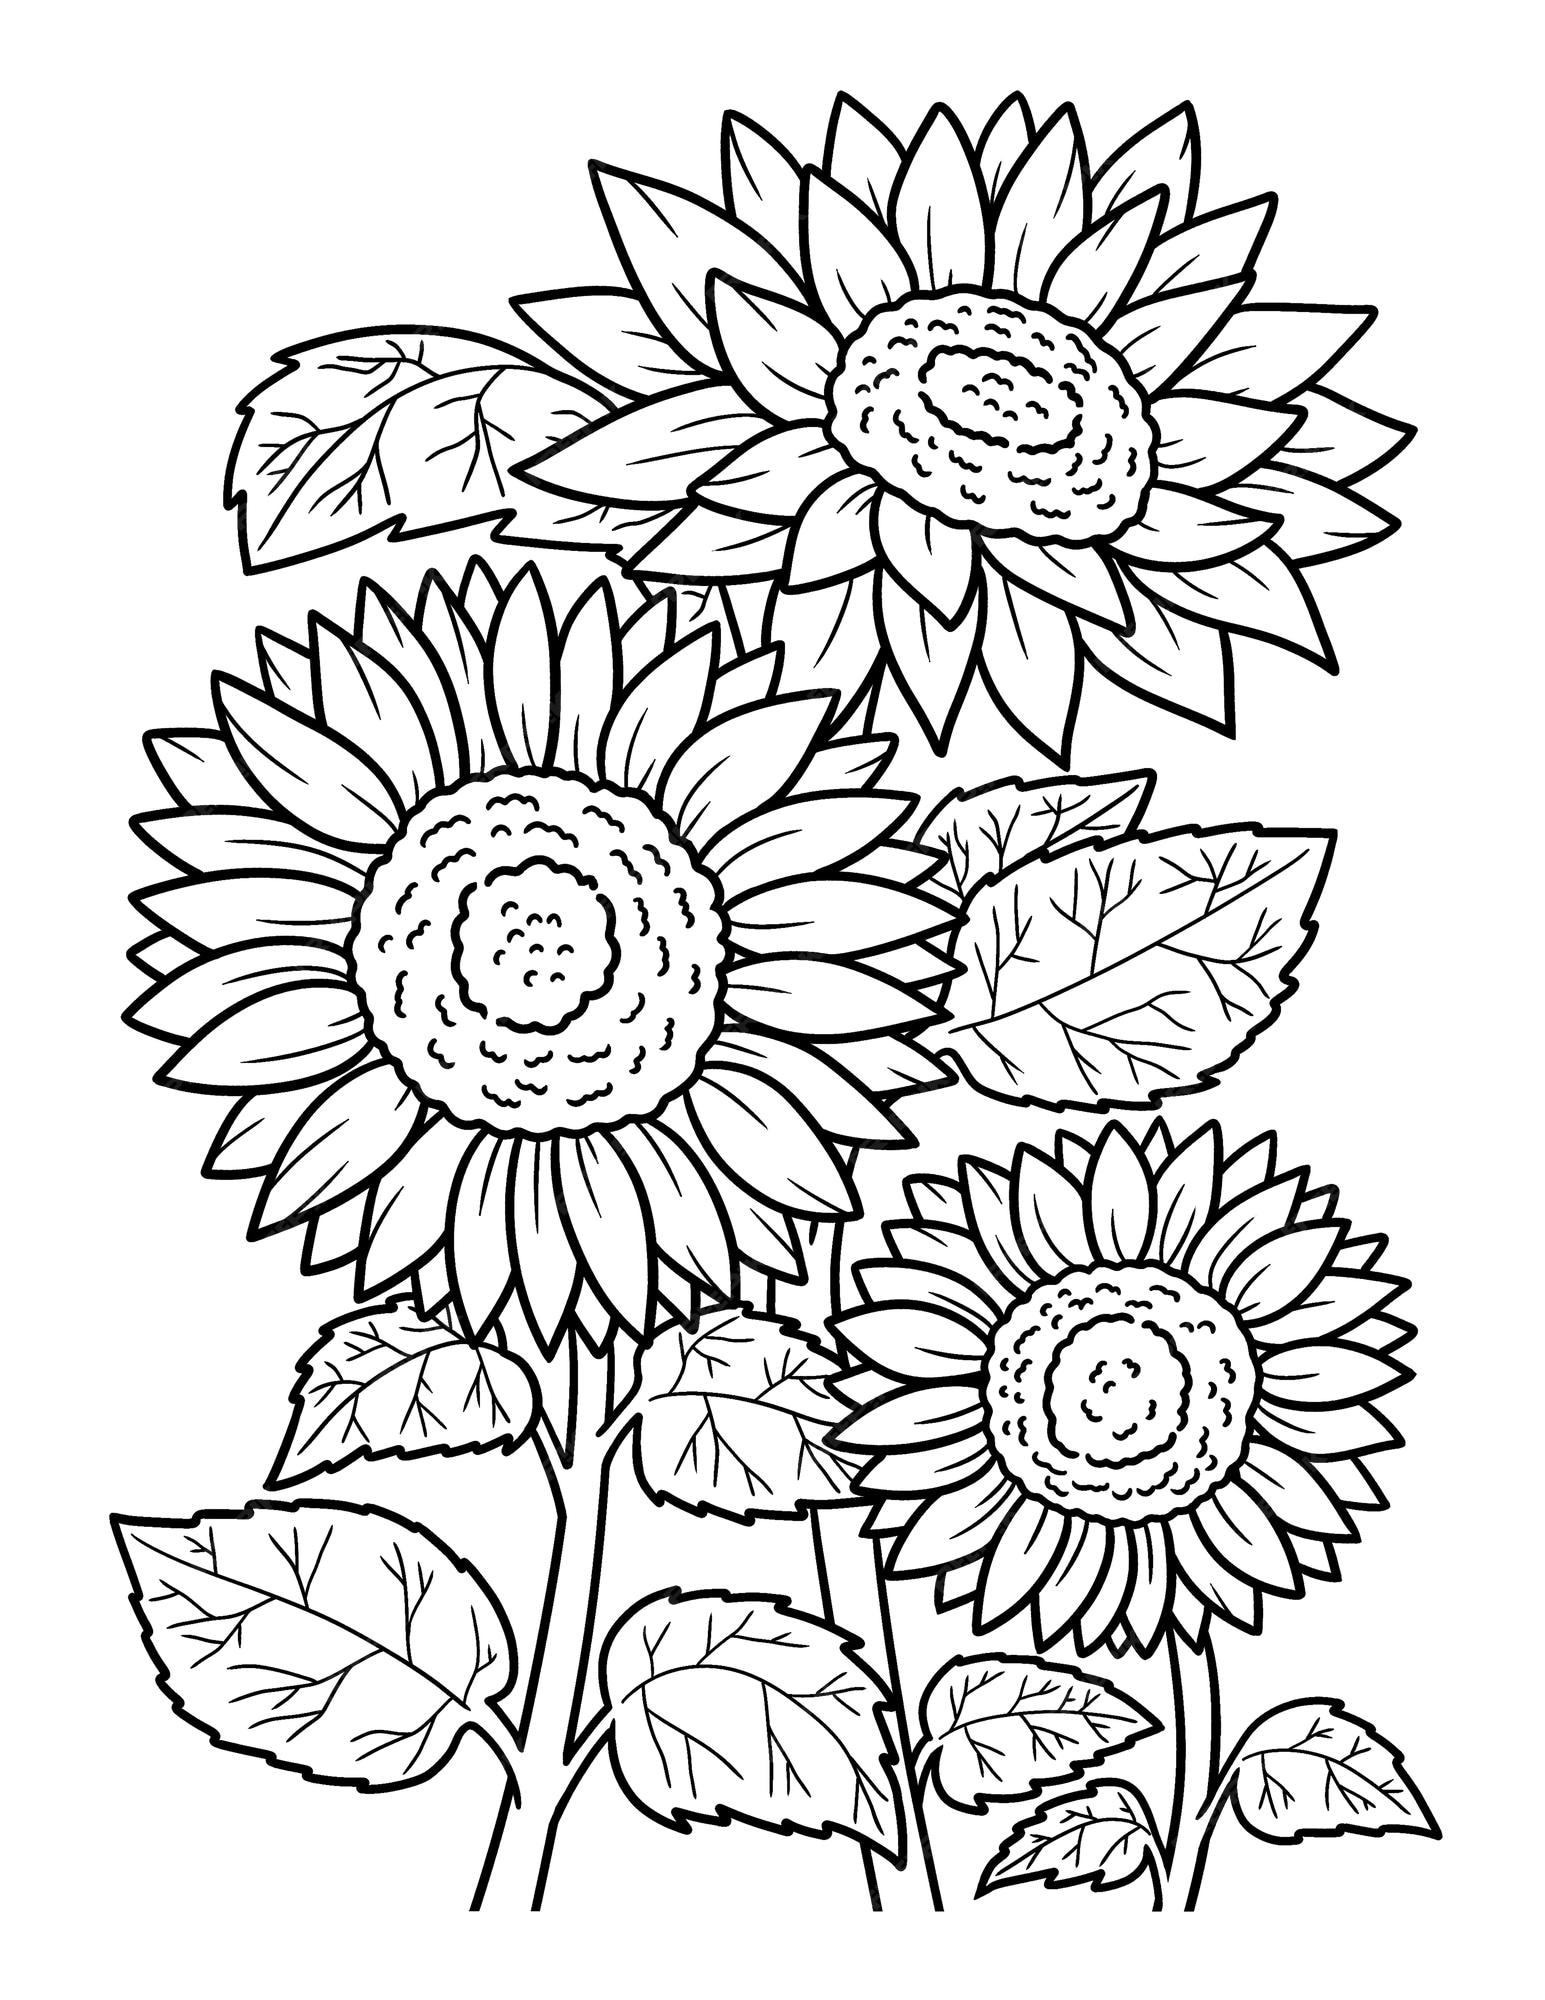 Premium vector sunflower coloring page for adults